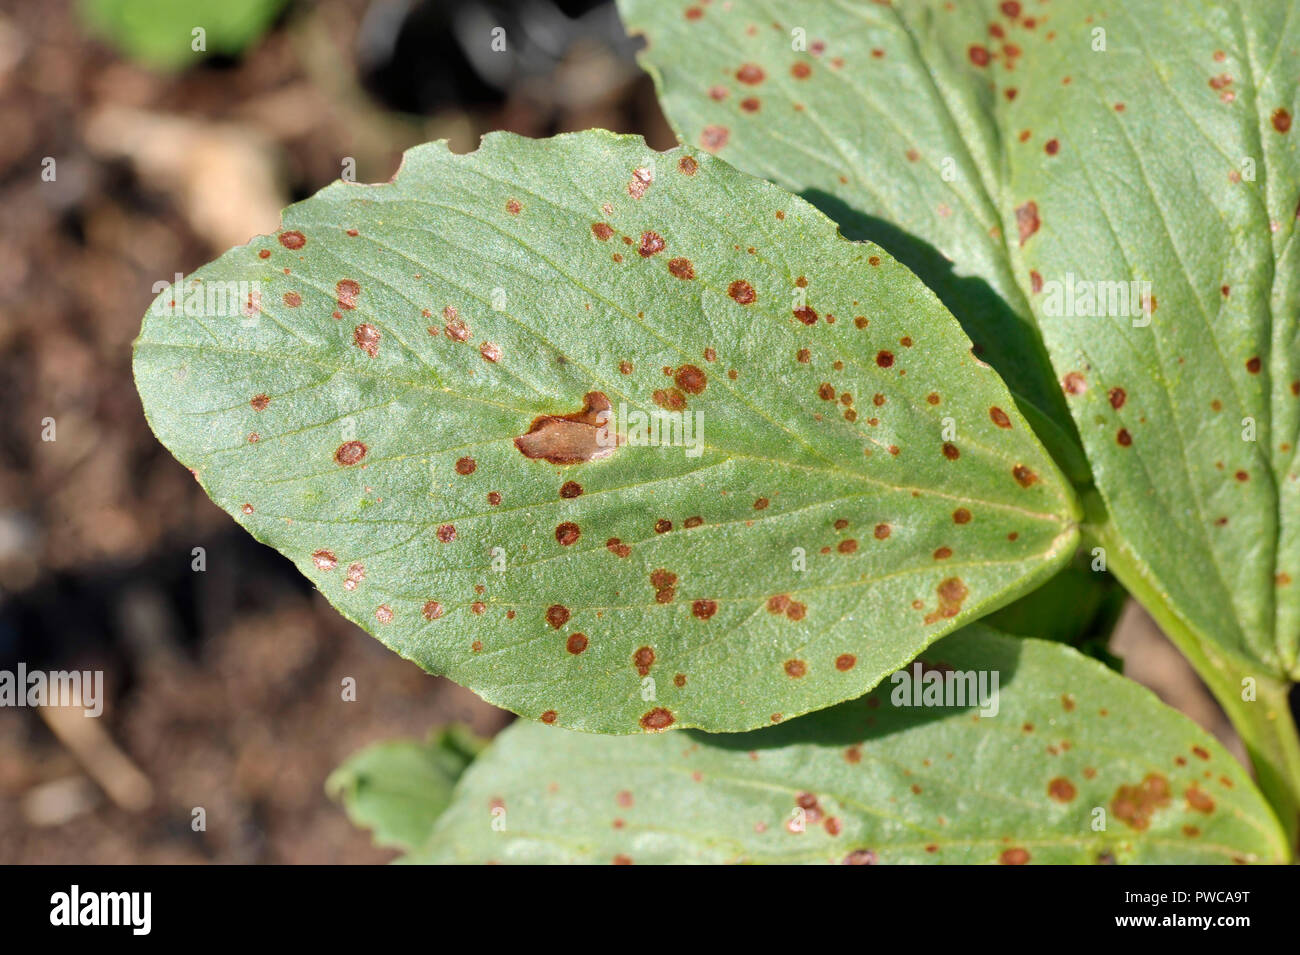 Broad bean plant with Chocolate spot disease on the foliage, a fungal problem Botrytis Fabae, Botrytis Cinerea. Stock Photo